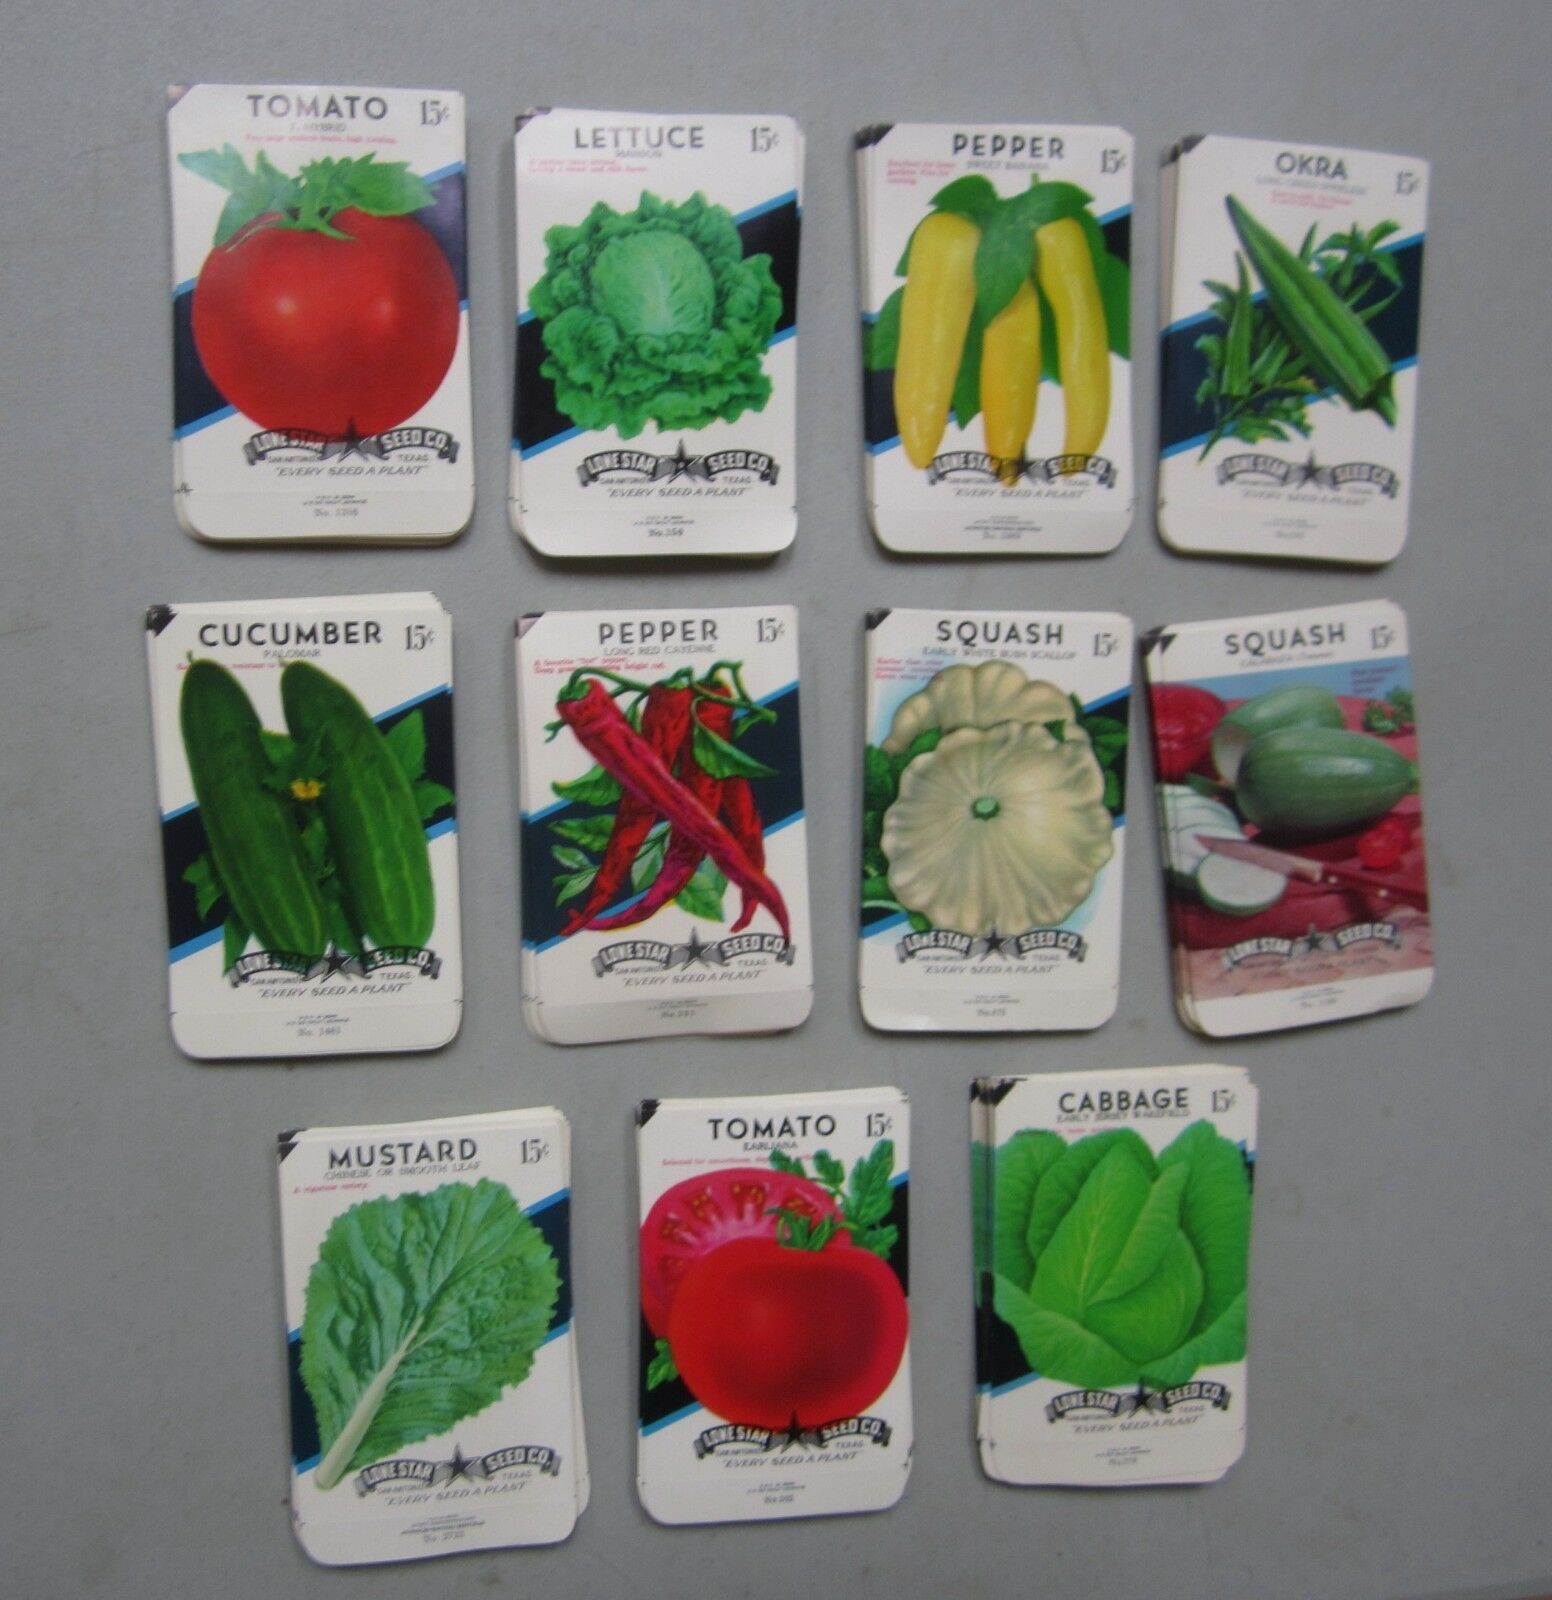  Lot of 275 Old Vintage Vegetable SEED PACKETS ...